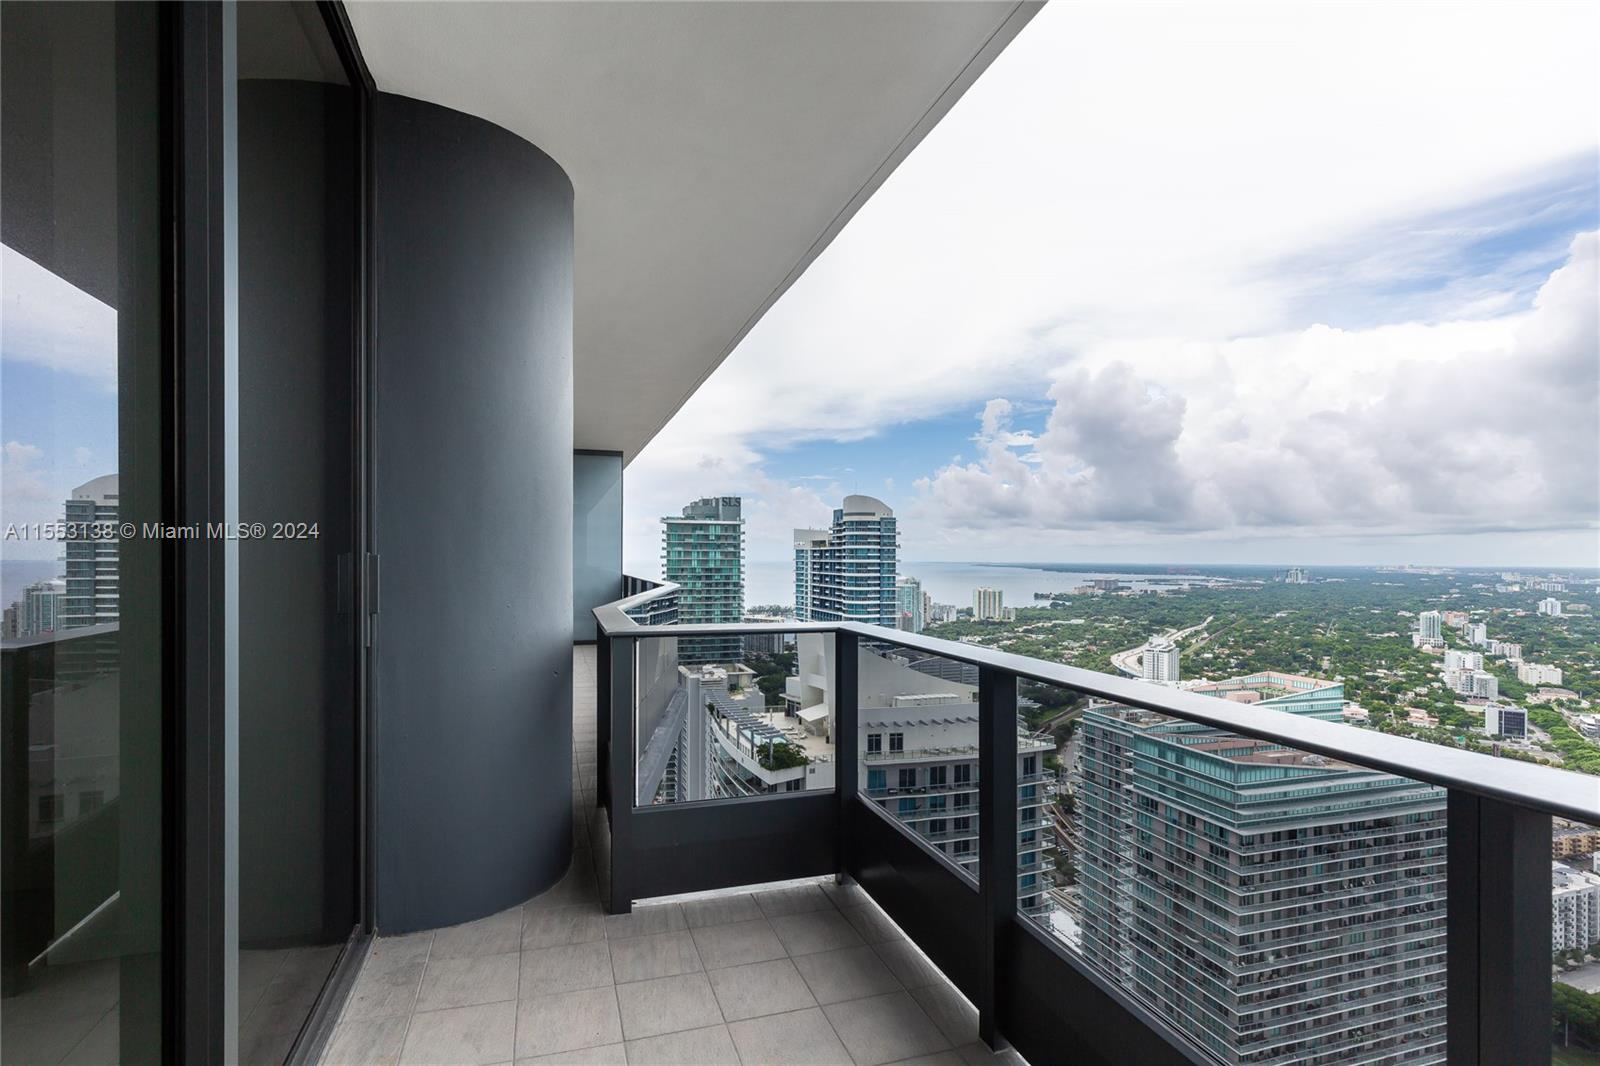 Amazing 2 bedroom + den / 2.5 bath Penthouse. Brickell Flatiron is a 64-story glass tower by developer Ugo Colombo featuring the highest quality Italian finishes, resort style amenities and service. Amenities include rooftop spa and fitness center with private steam, sauna, locker facilities, lap pool, children's playroom, full-time doorman and concierge, private movie theater, wine room and social lounge. Located in the heart of Brickell, close to Mary Brickell Village, Brickell City Centre and all that Brickell has to offer.